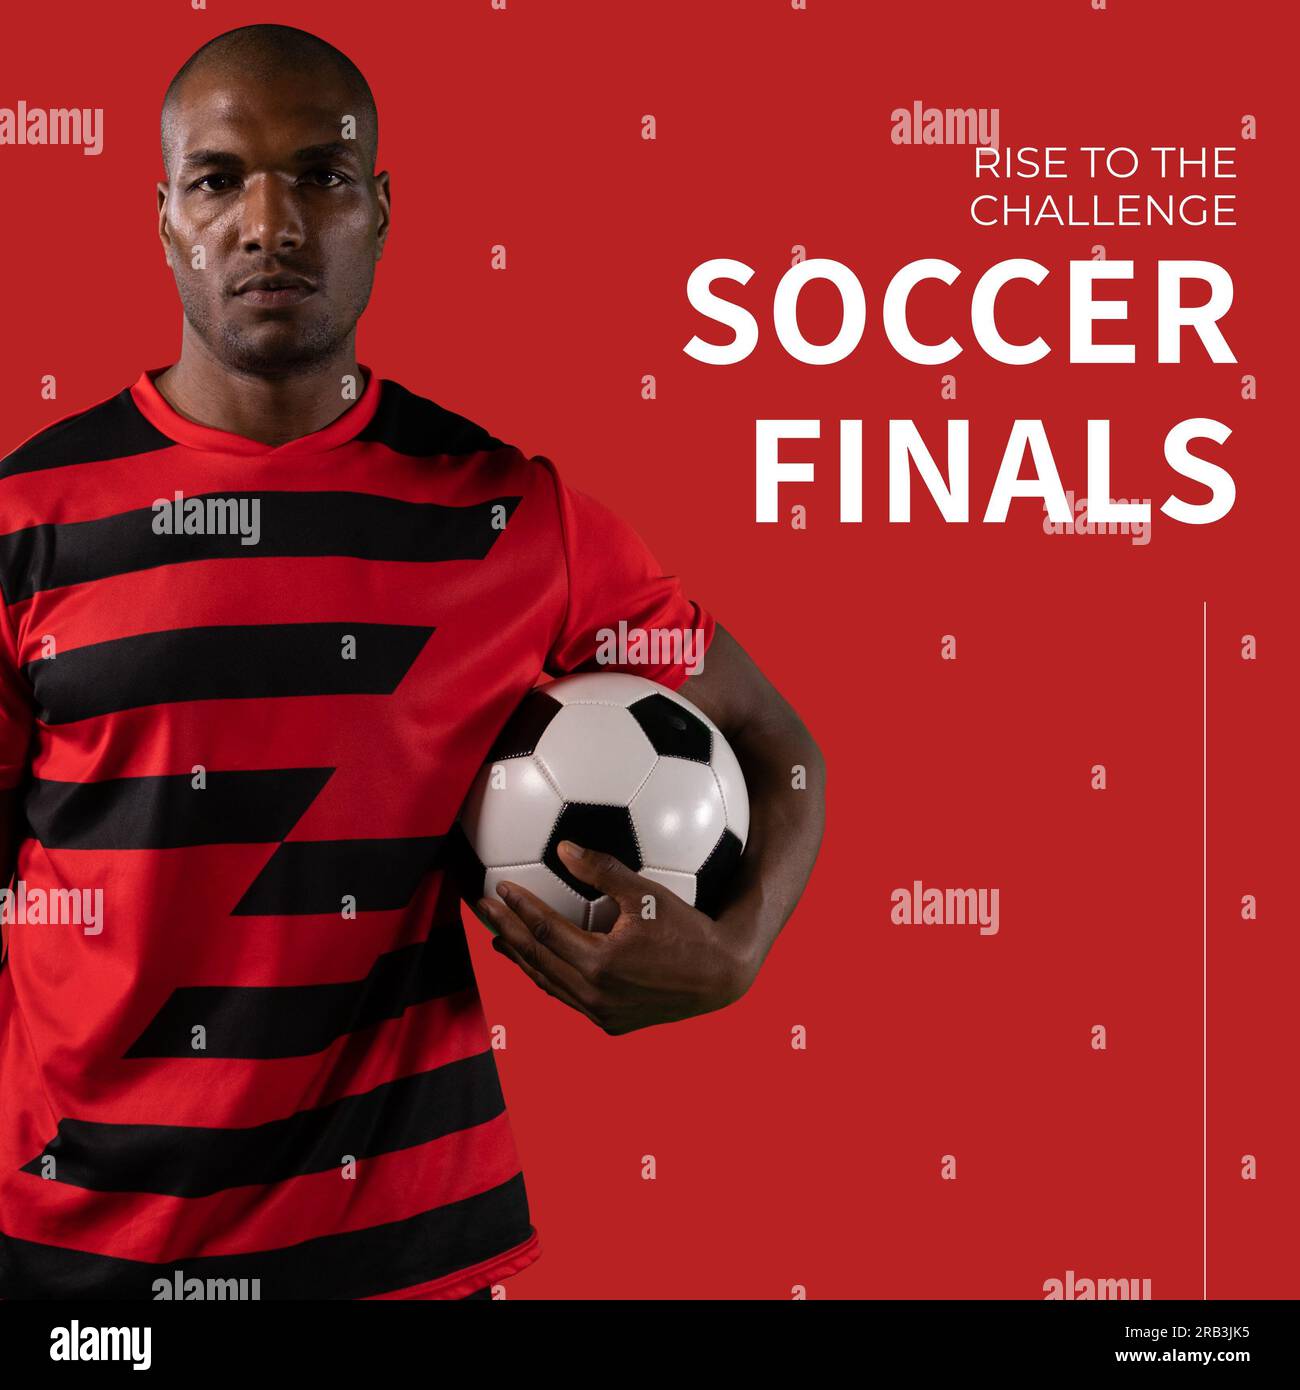 Composite of soccer finals raise to the challenge text over african